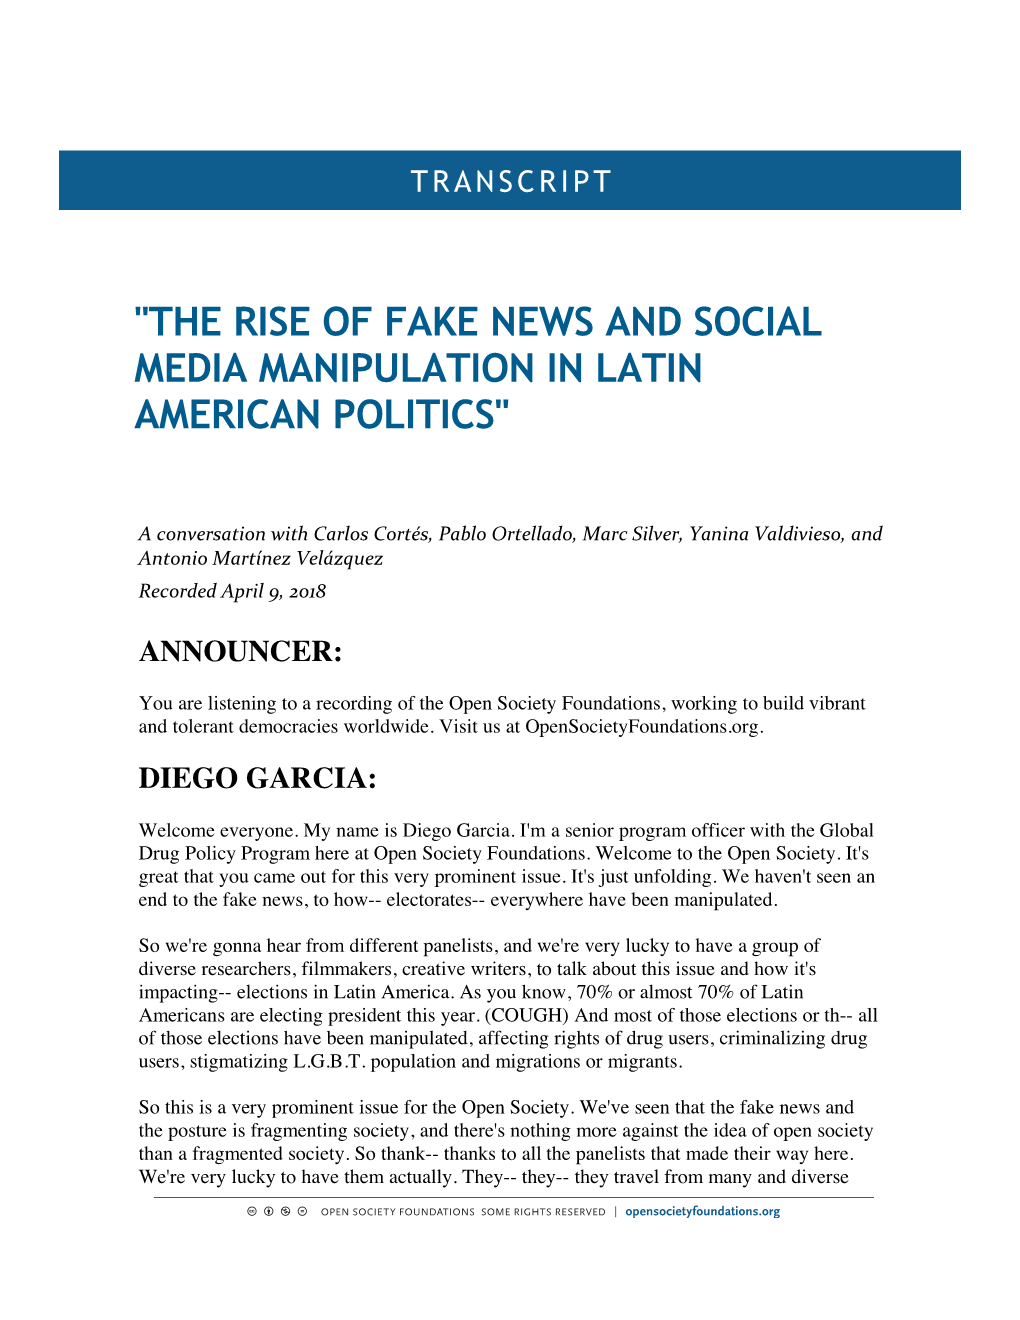 "The Rise of Fake News and Social Media Manipulation in Latin American Politics"